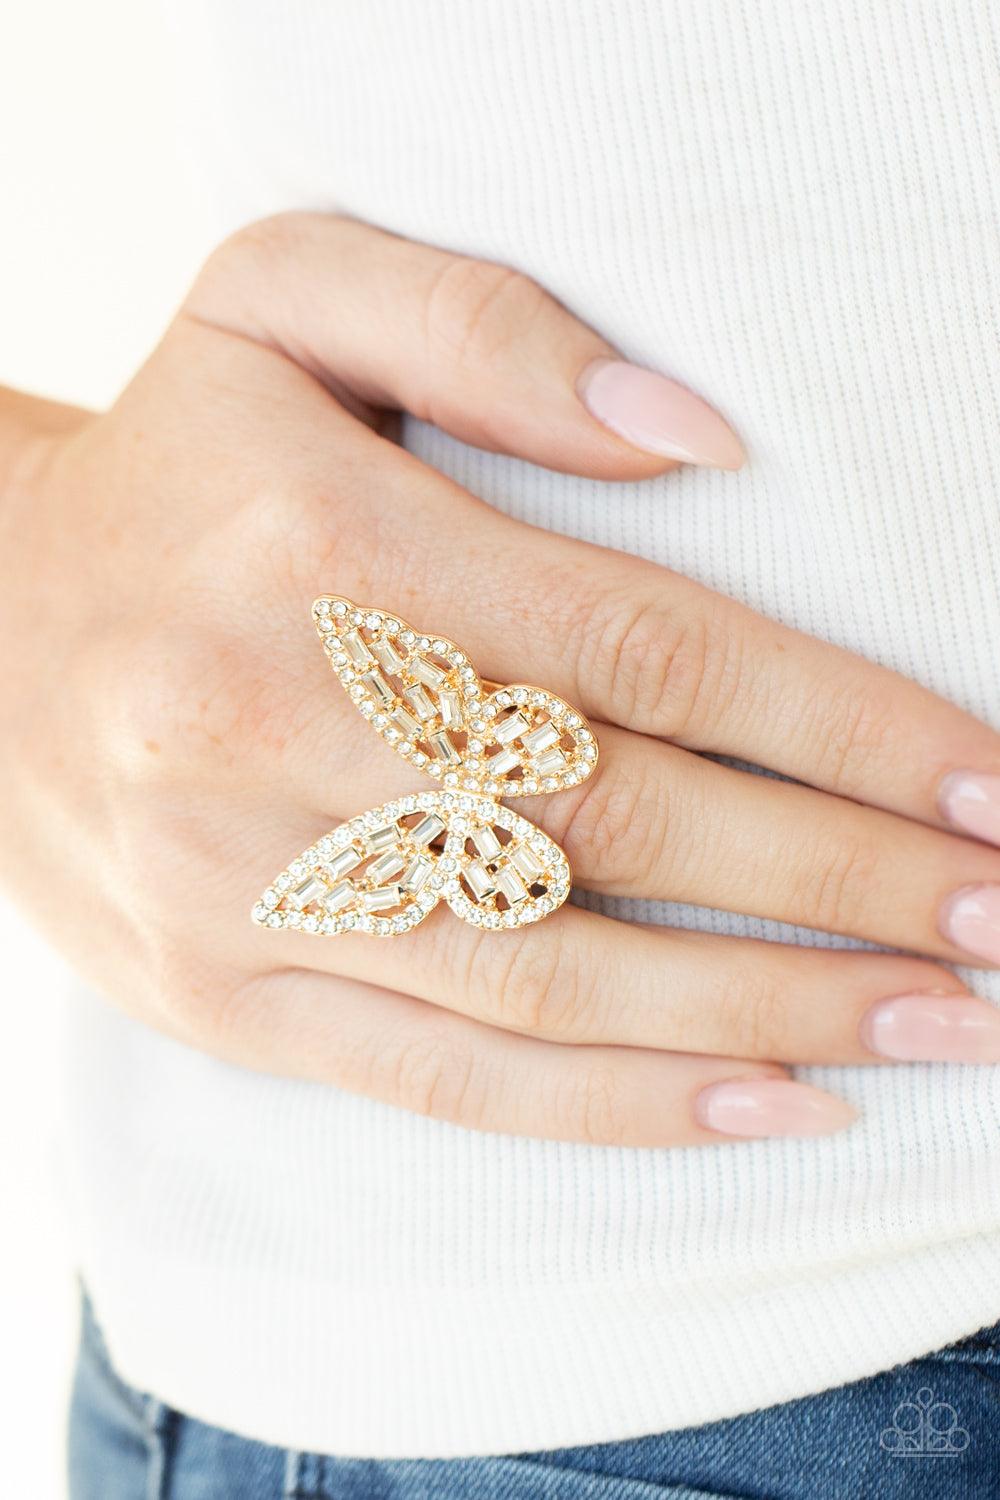 Paparazzi Accessories Flauntable Flutter - Gold Dainty white emerald style rhinestones are sprinkled across the golden wings of a butterfly that is encrusted in glassy white rhinestones for a dramatically dazzling finish. Features a stretchy band for a fl